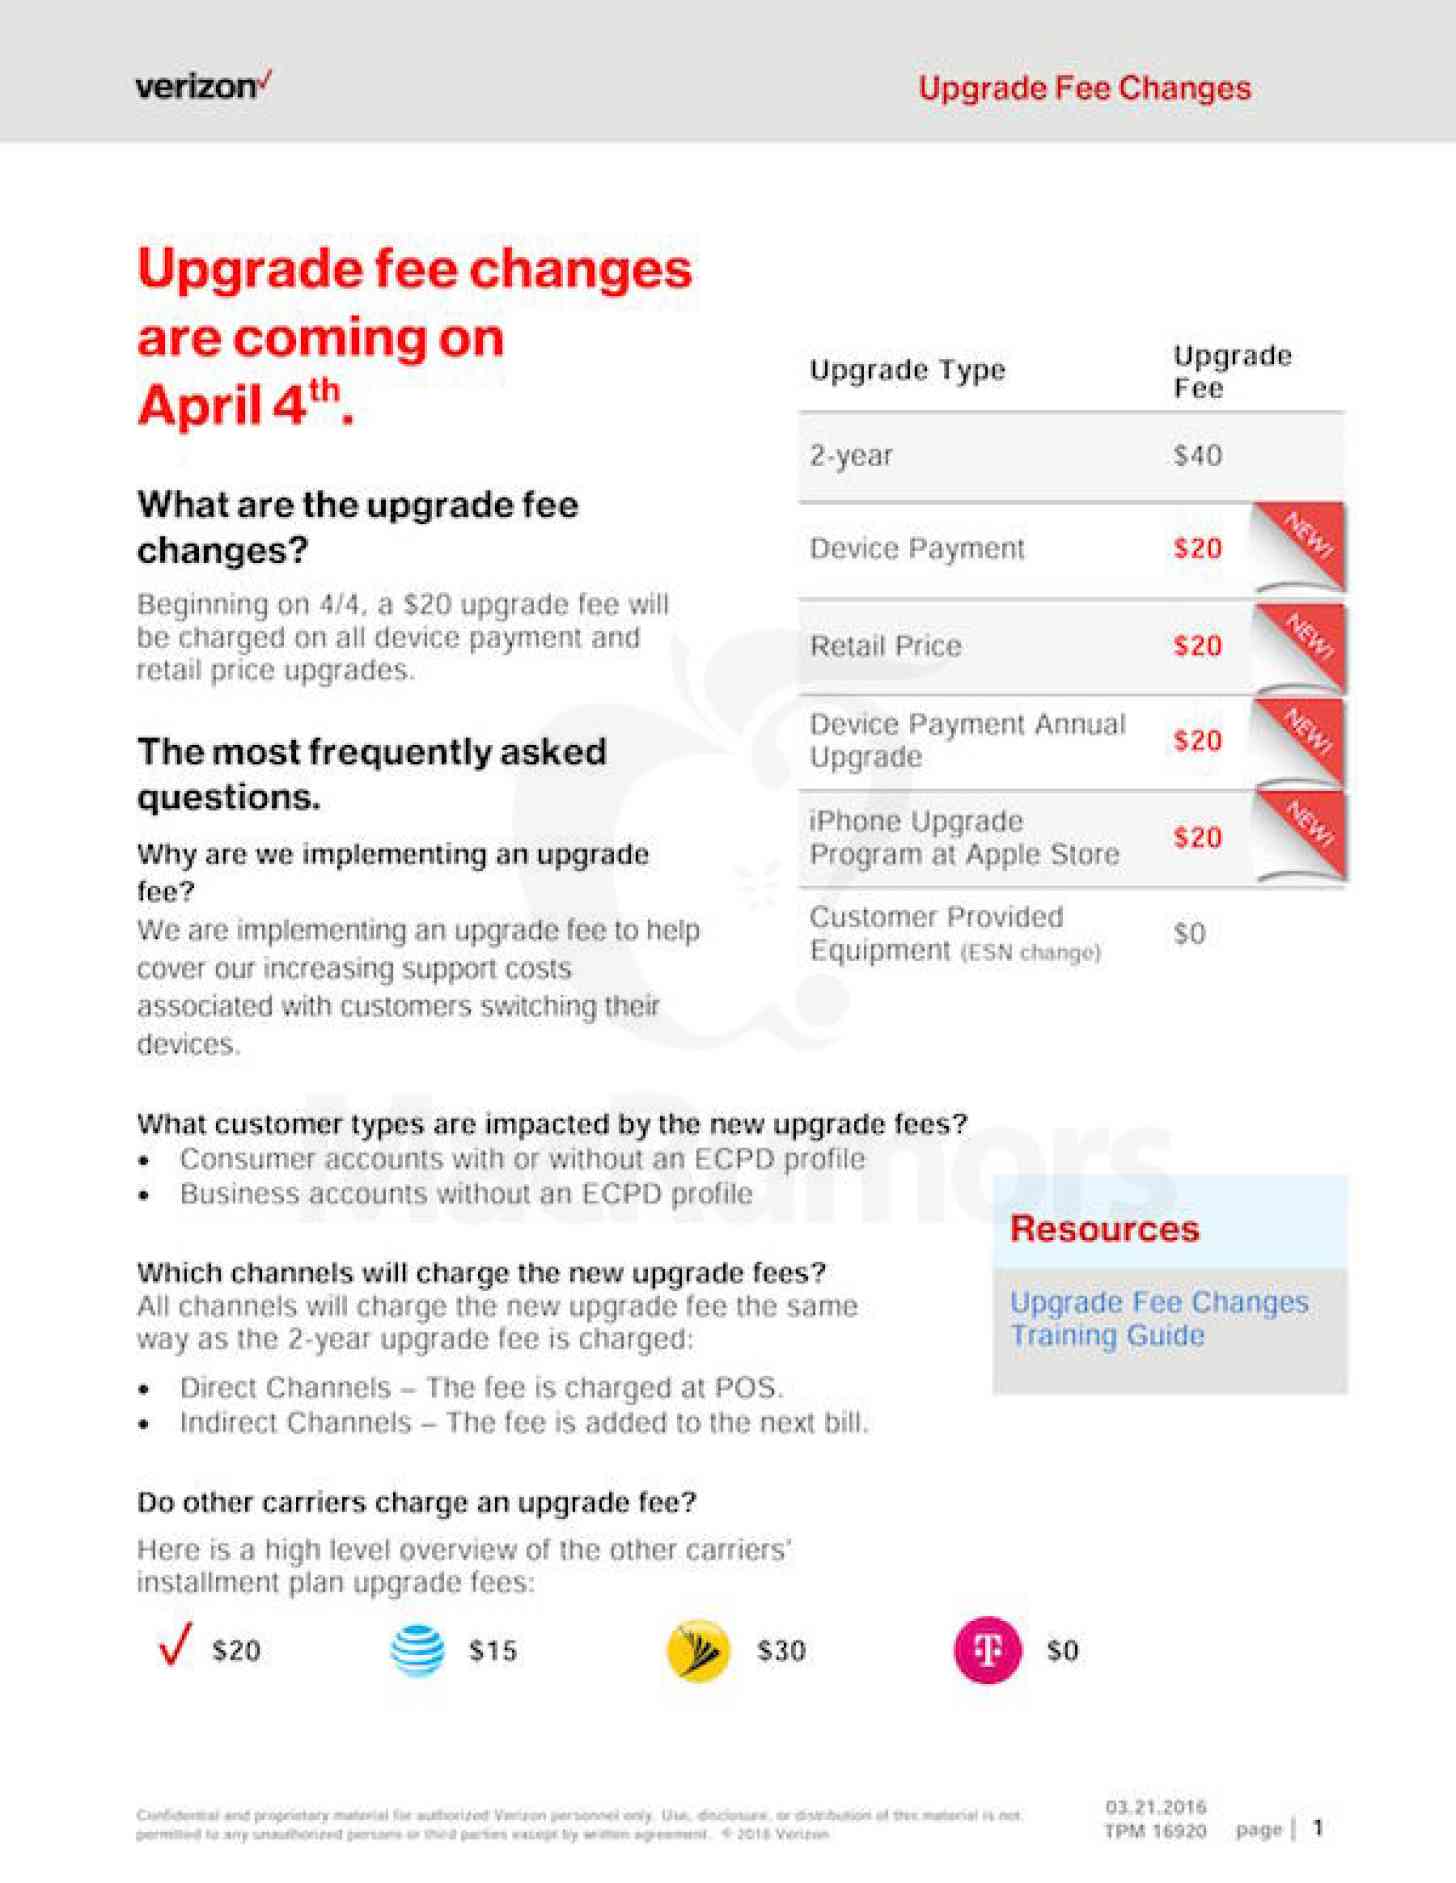 Verizon to Implement $20 Upgrade Fee on New Phone Purchases Starting April 4